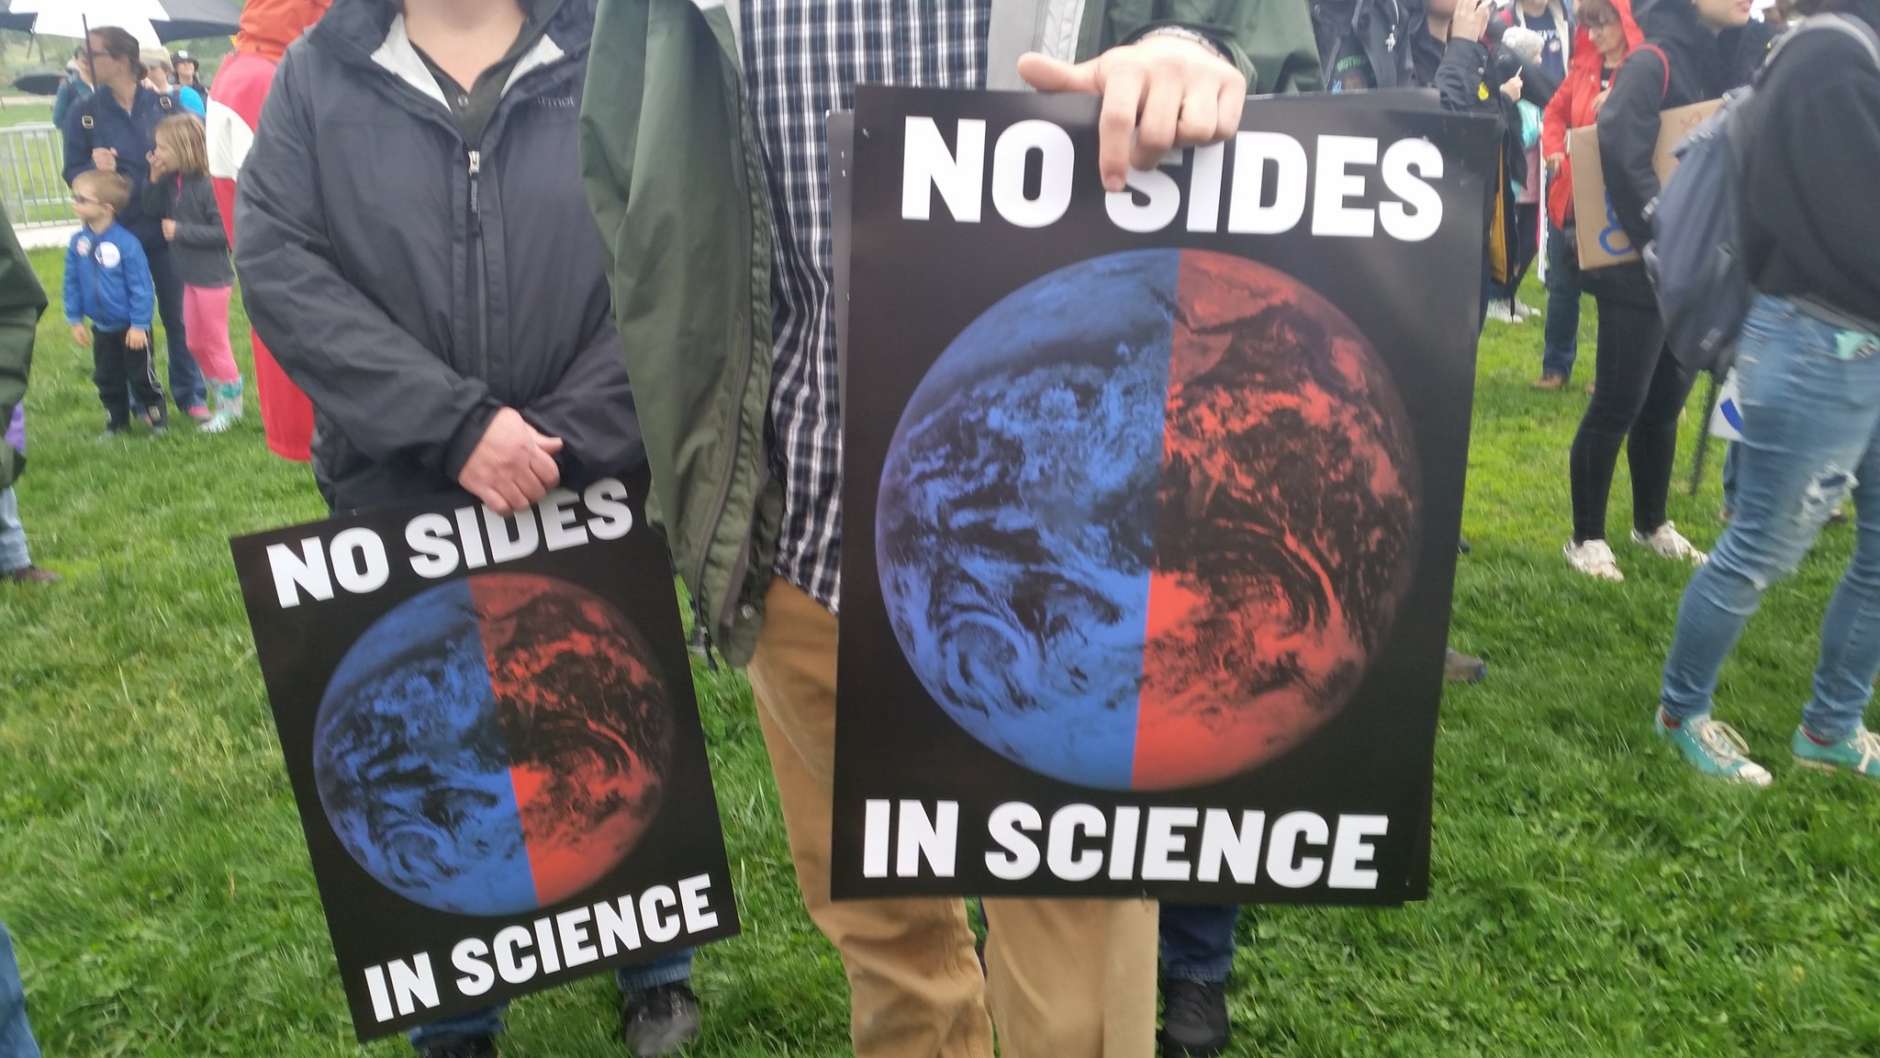 March for Science protesters hold signs at the National Mall. (WTOP/Kathy Stewart)